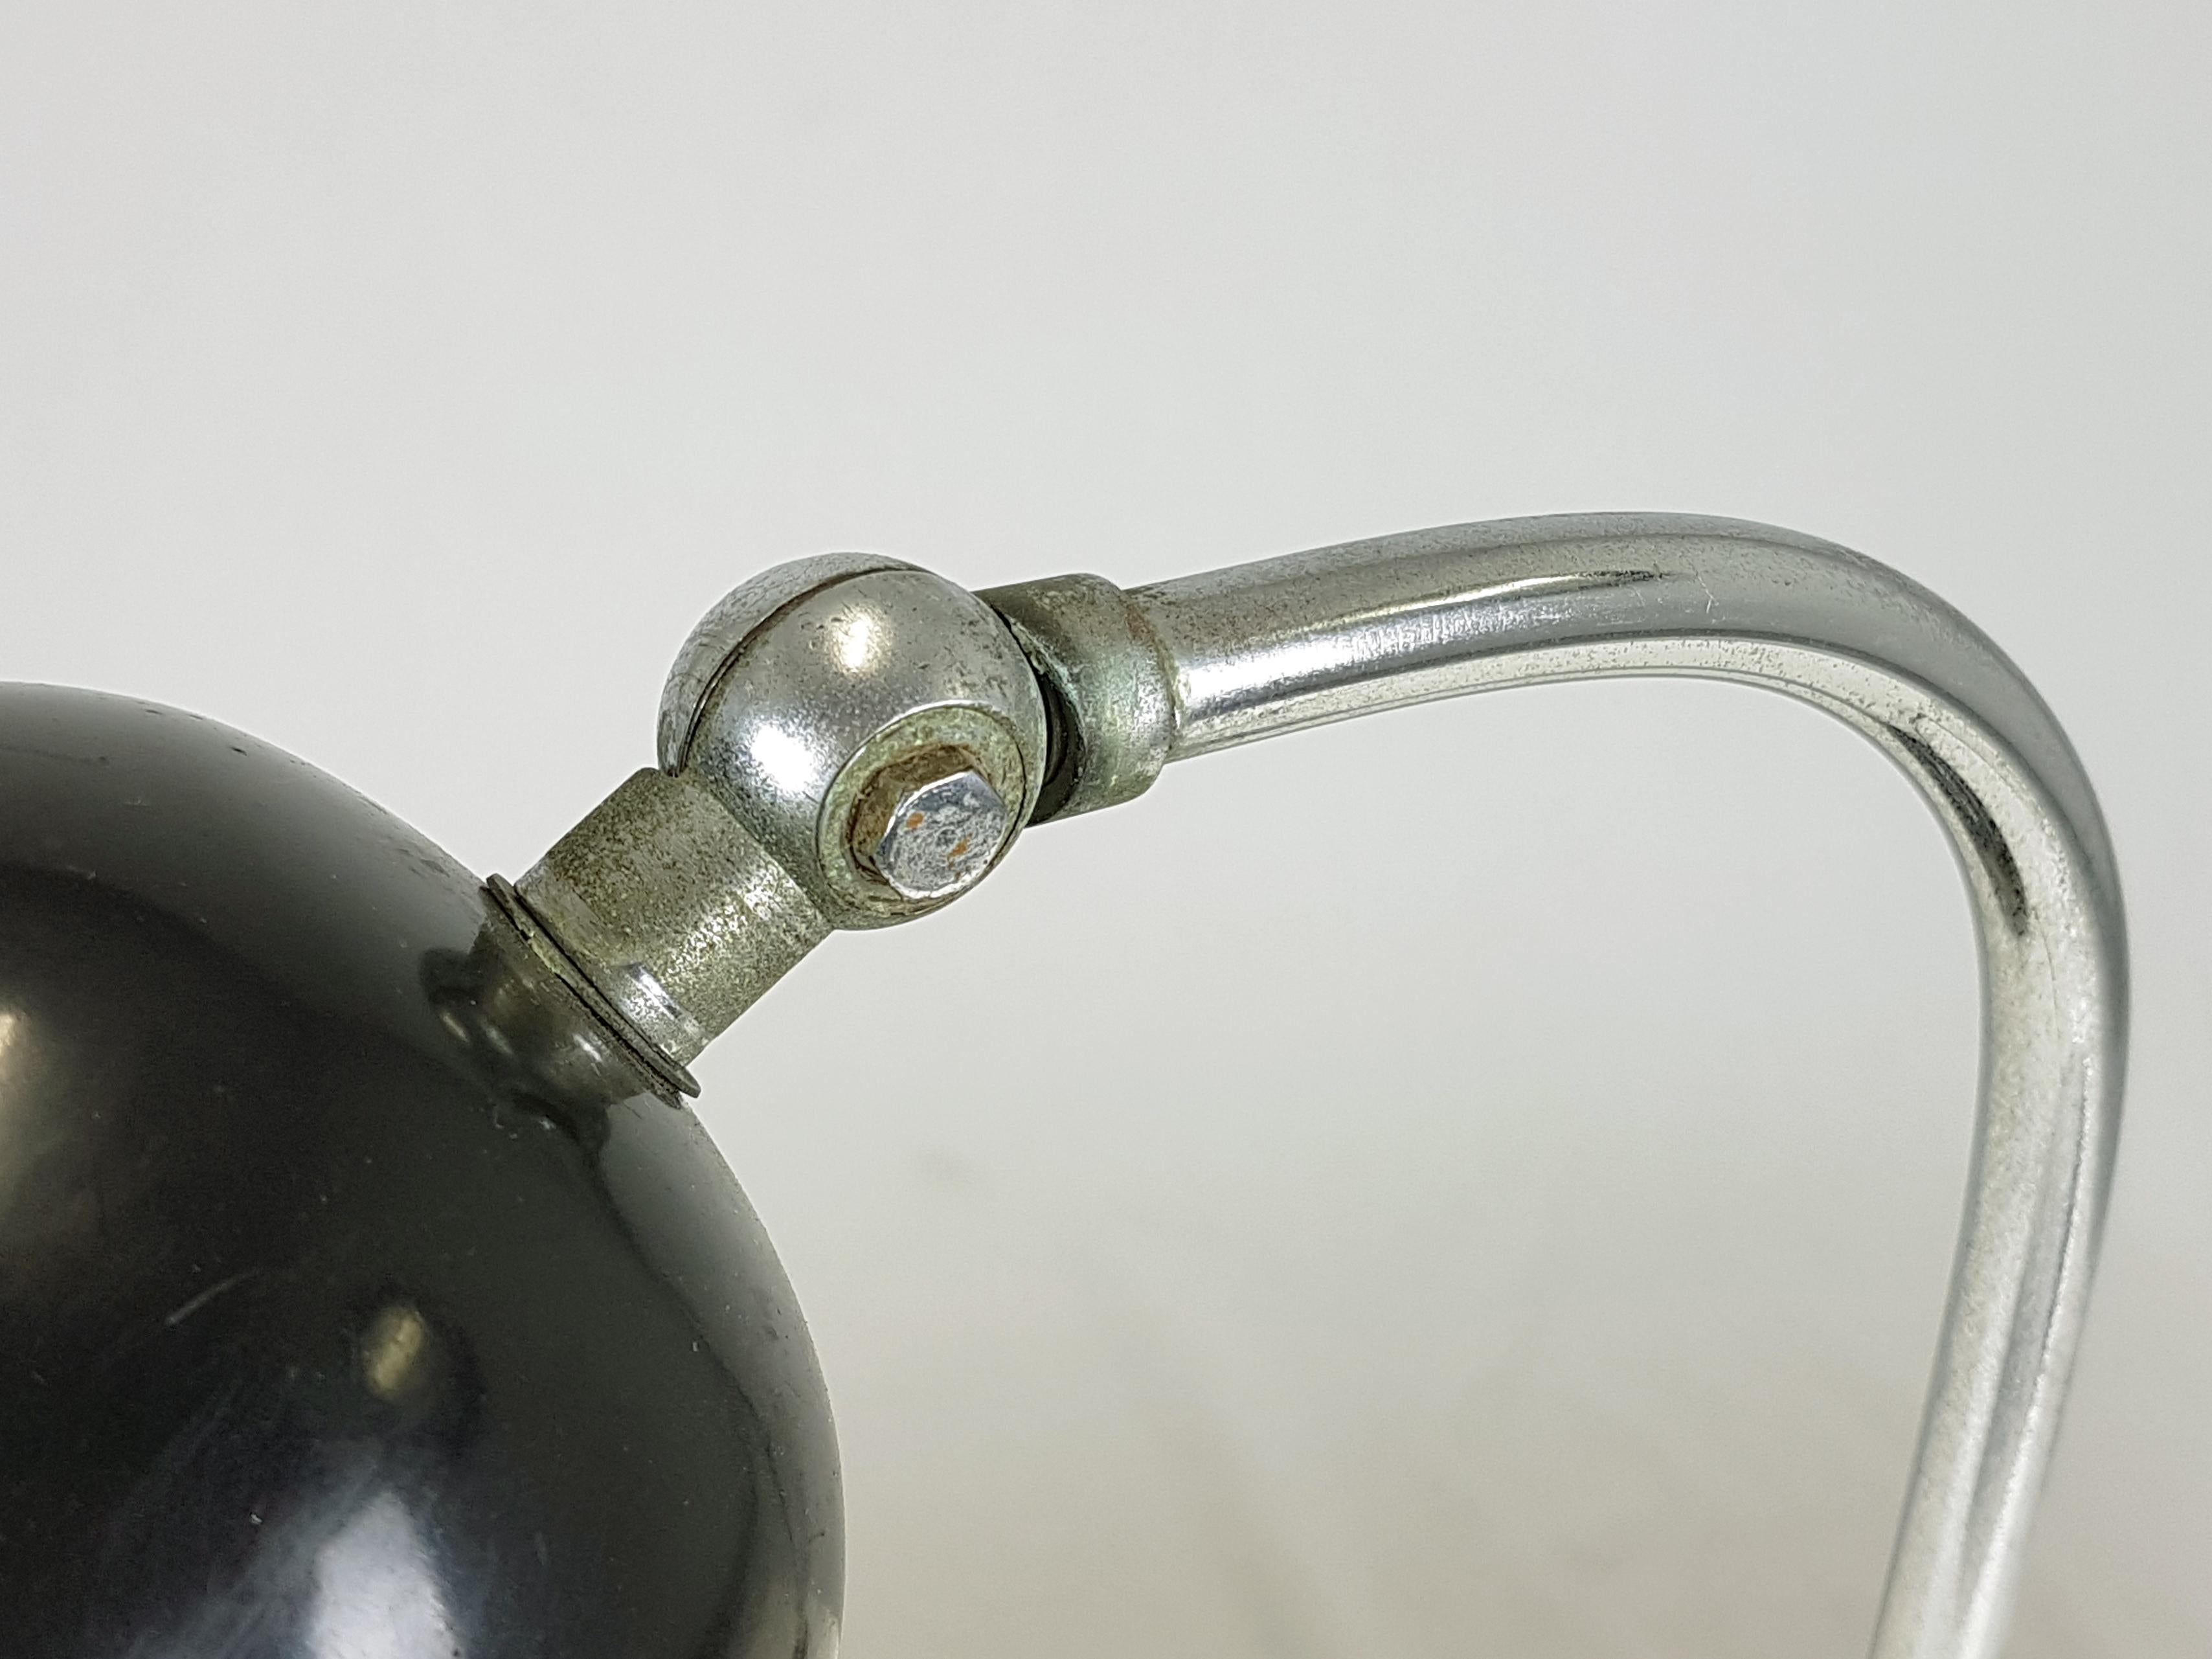 Rare Chrome Plated & Black Painted Metal Rationalist Table Lamp by I. Gardella For Sale 1